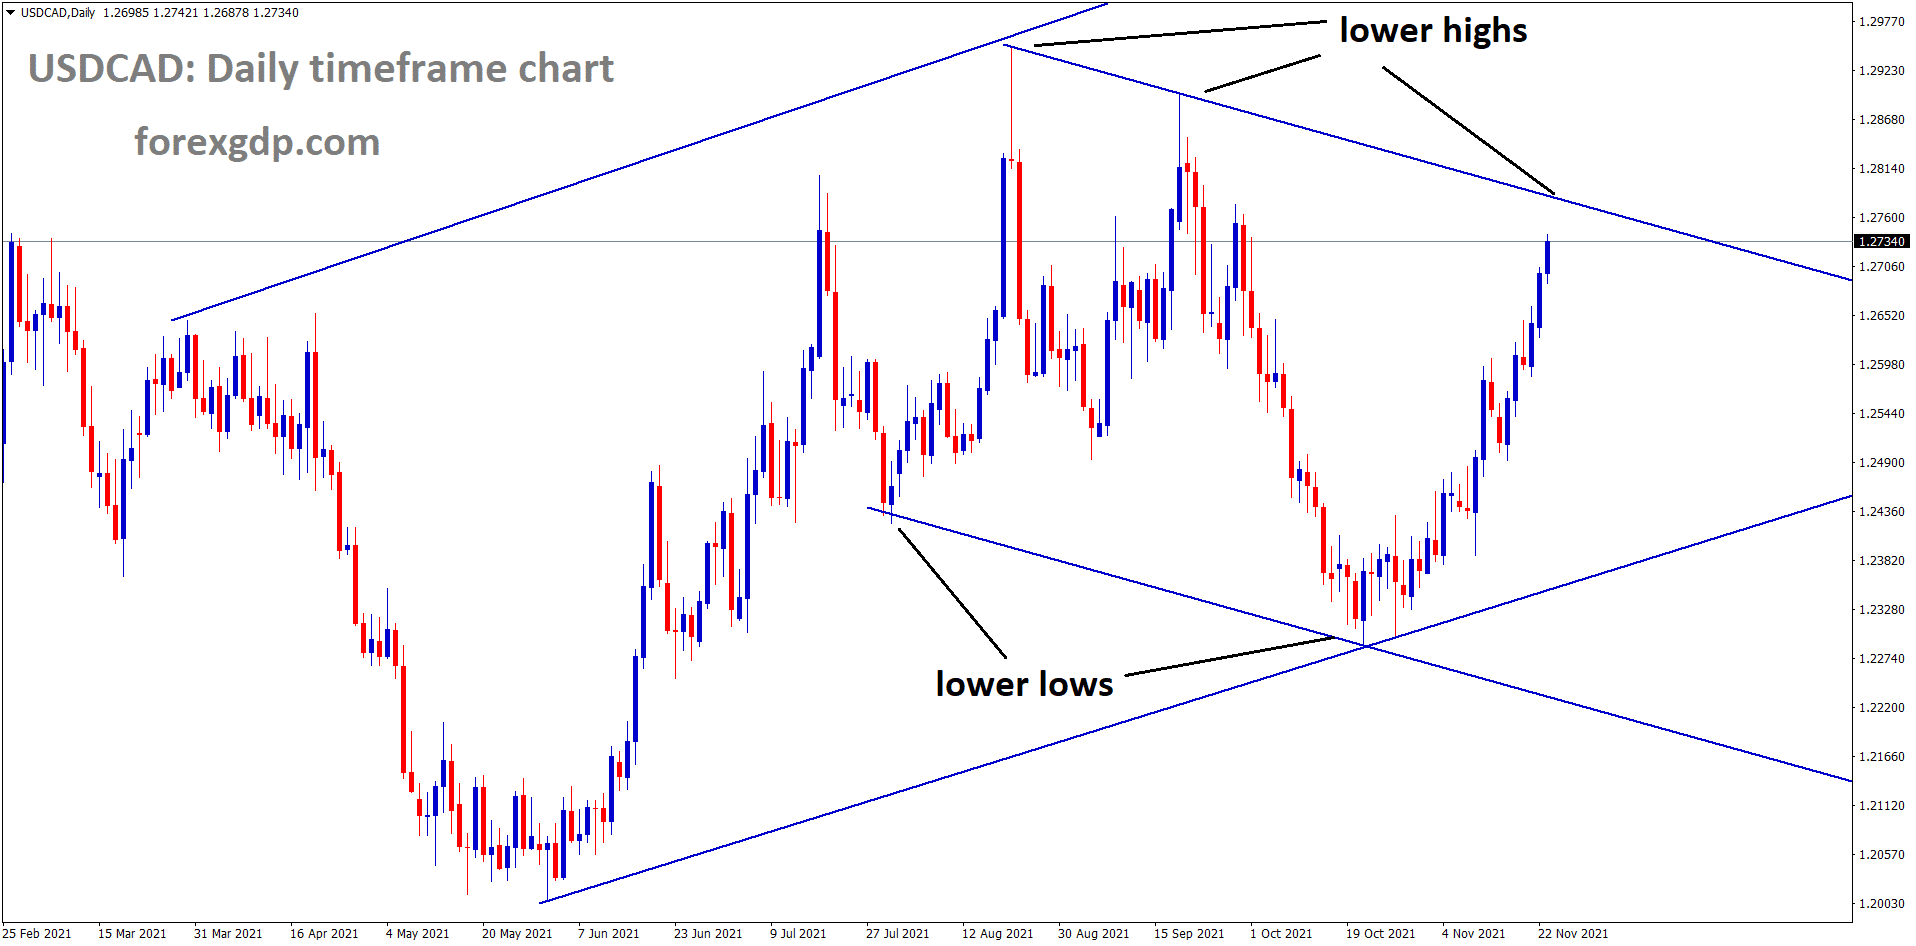 USDCAD is moving in the Descending channel and market near to the Top end or lower high area